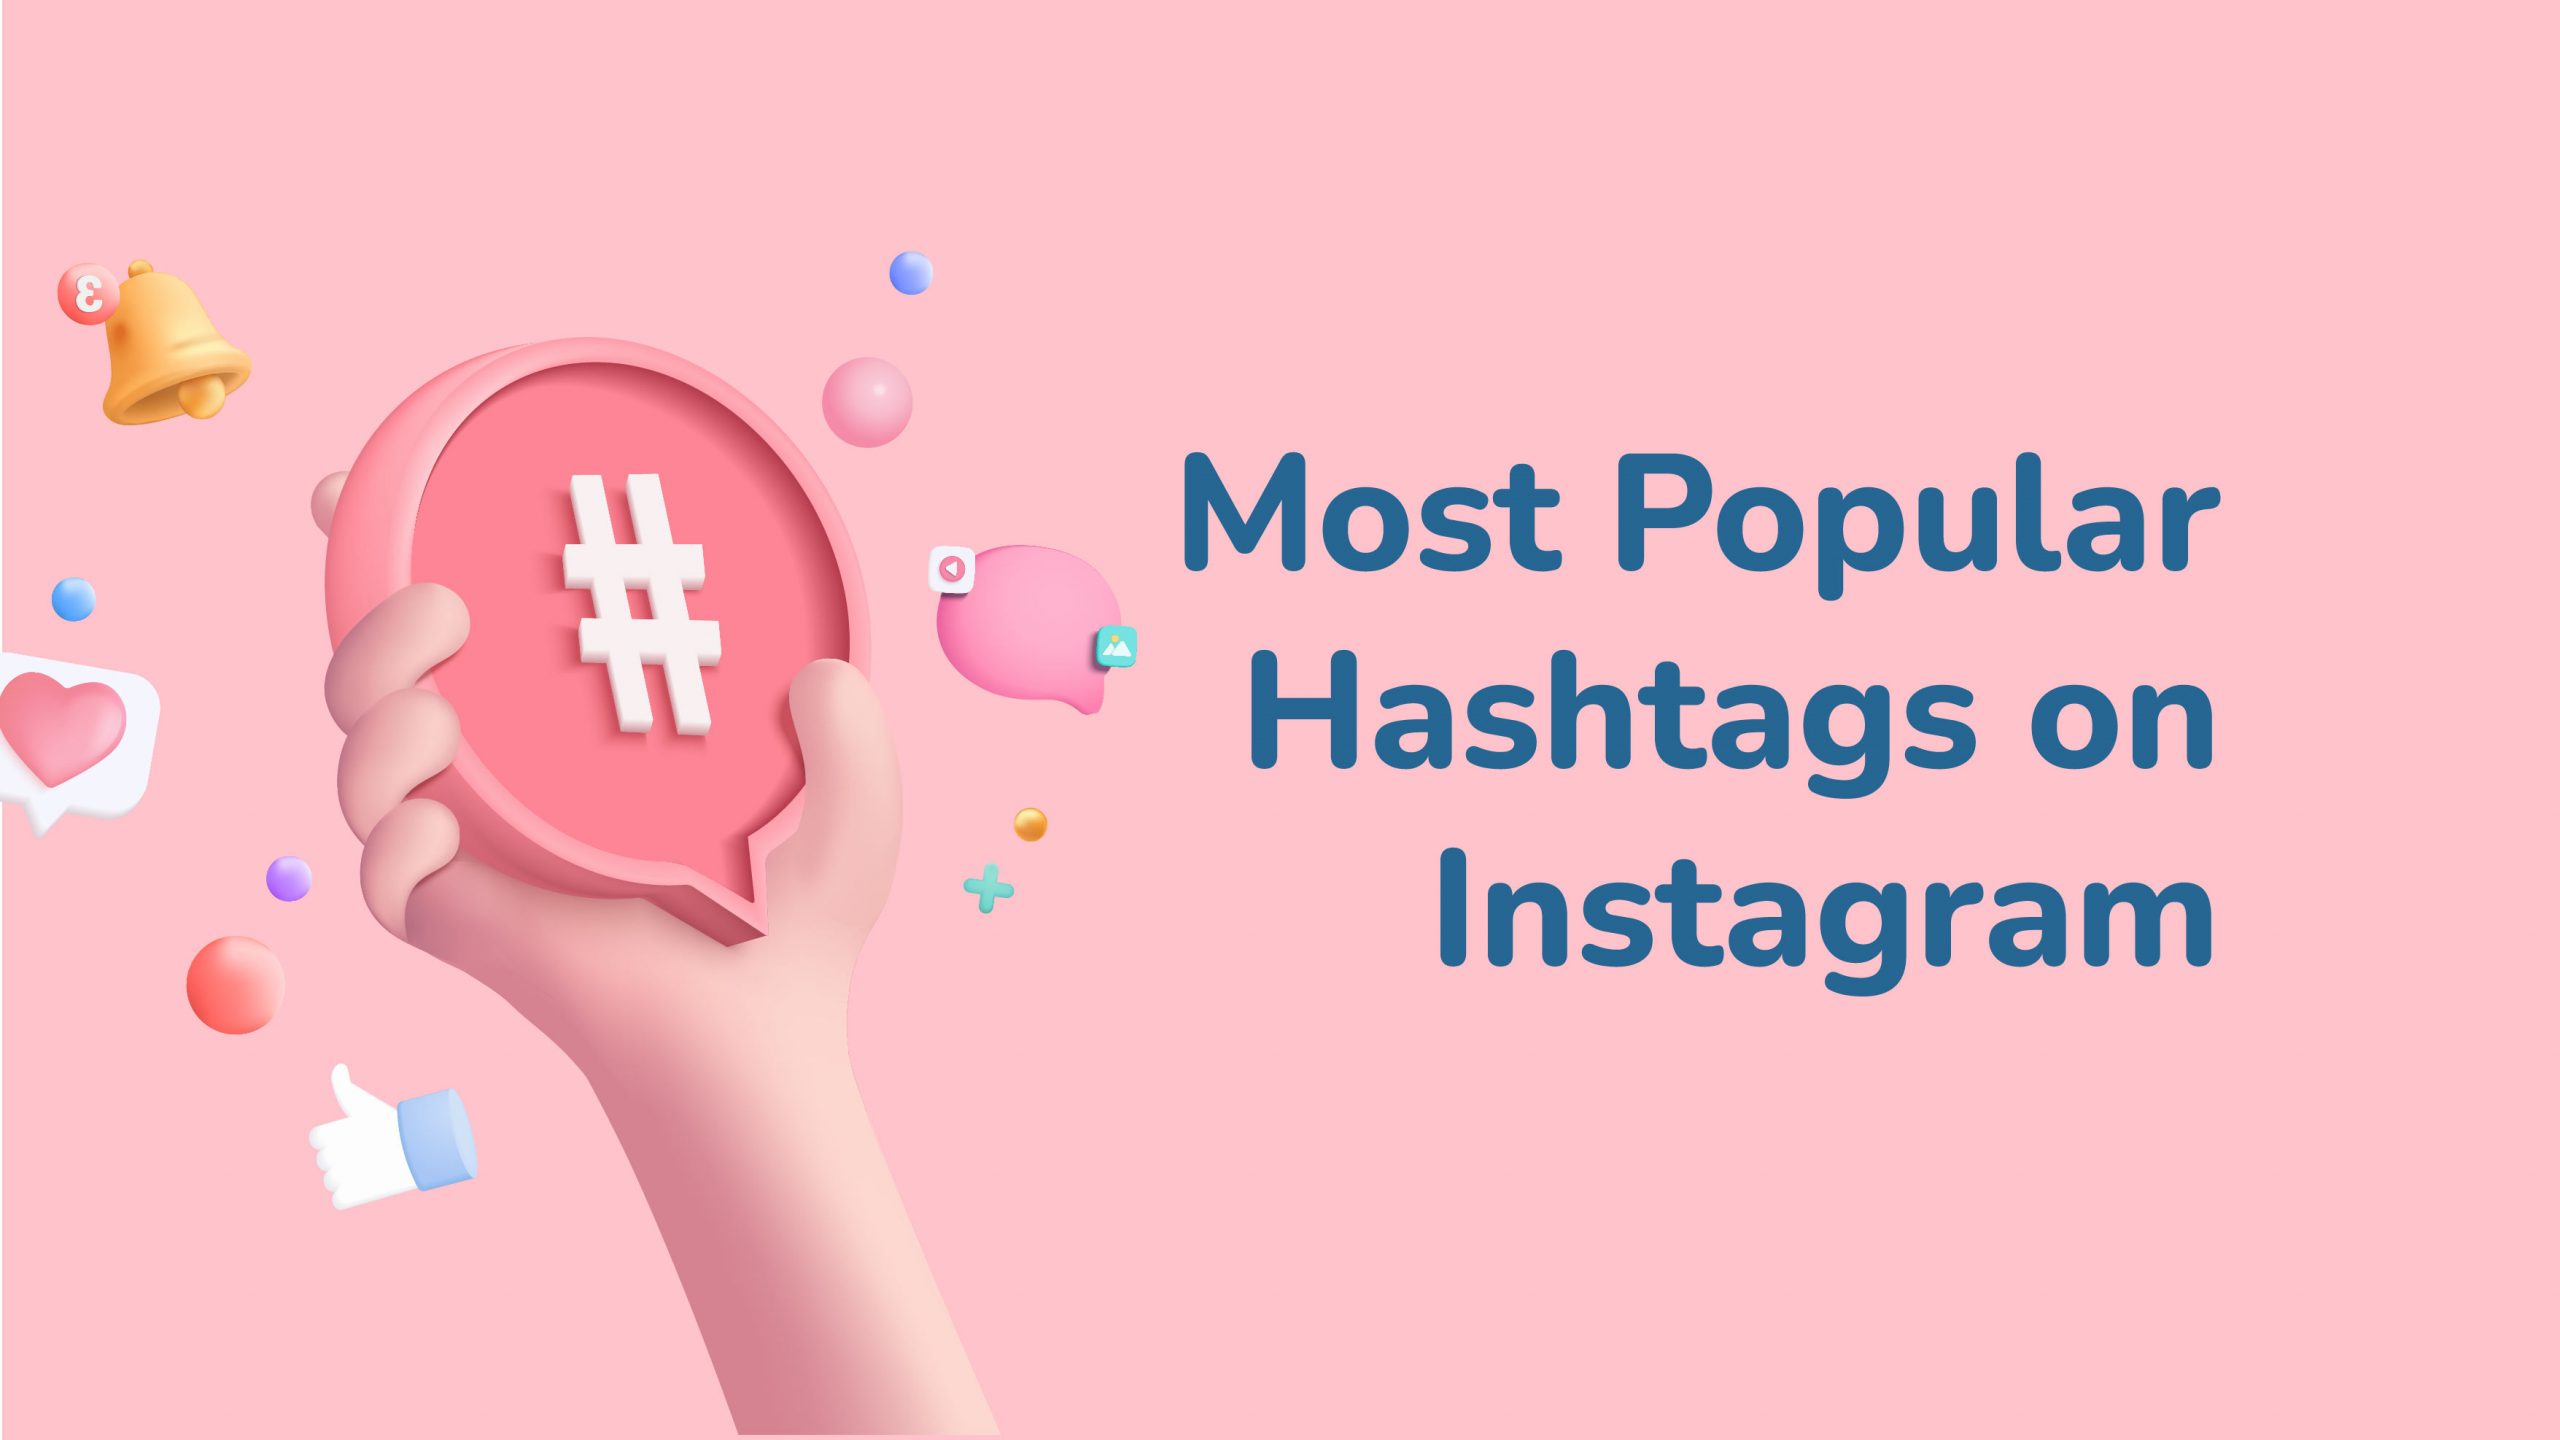 Most Popular Hashtags on Instagram